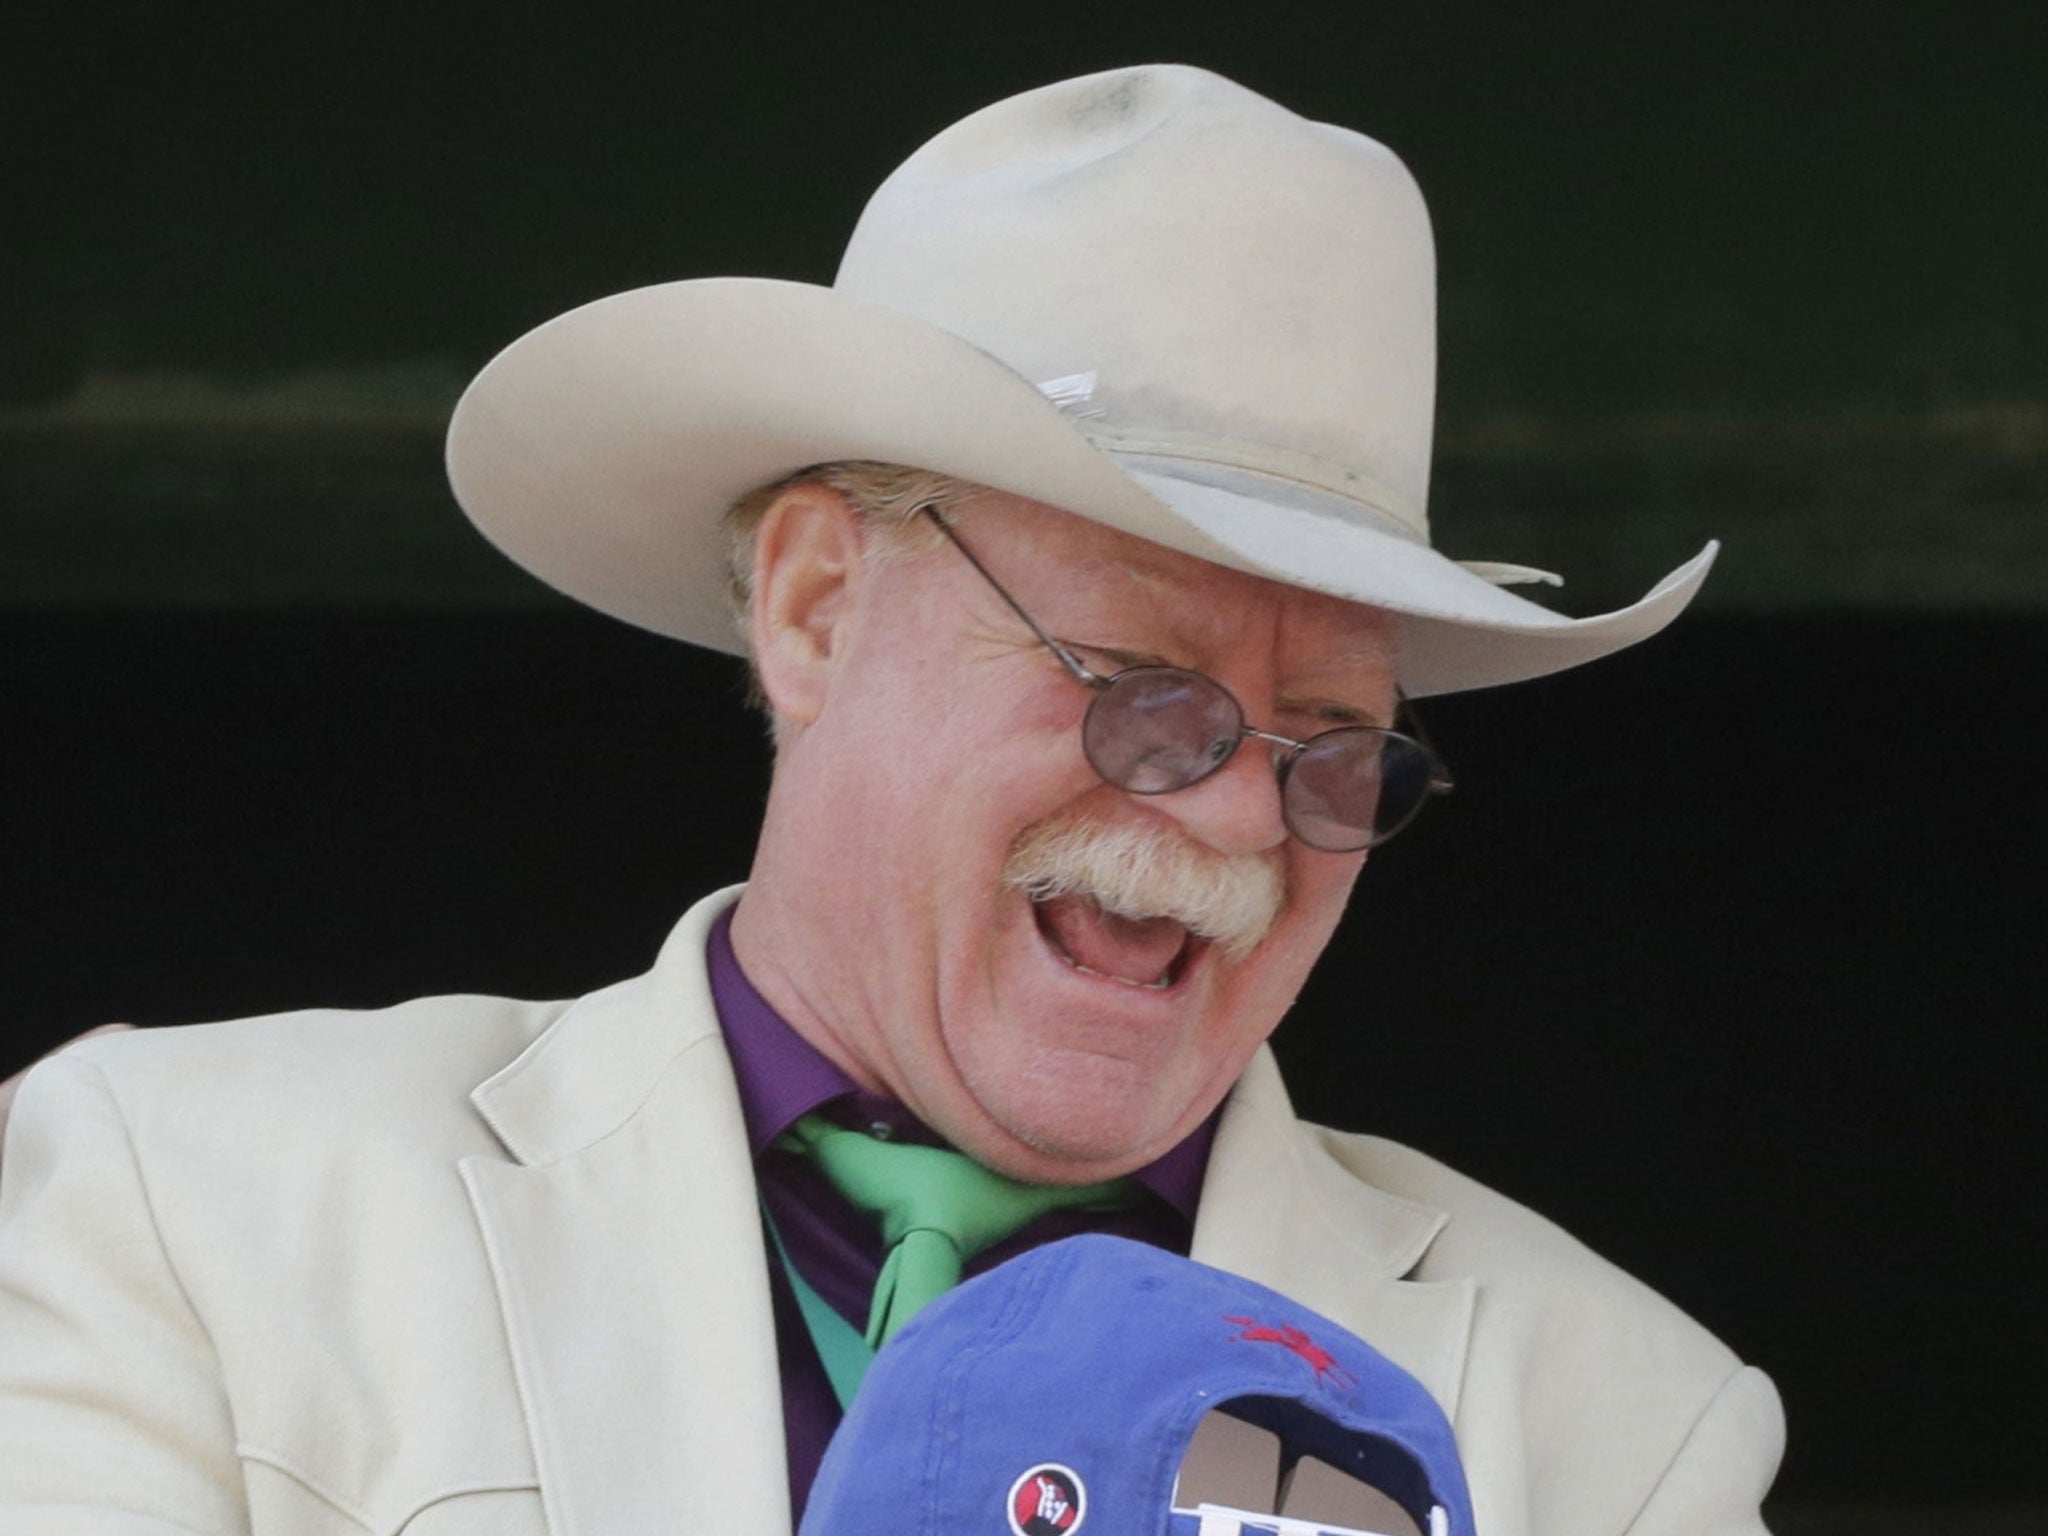 Steve Coburn, the co-owner of California Chrome, attacked rivals who denied him the Triple Crown